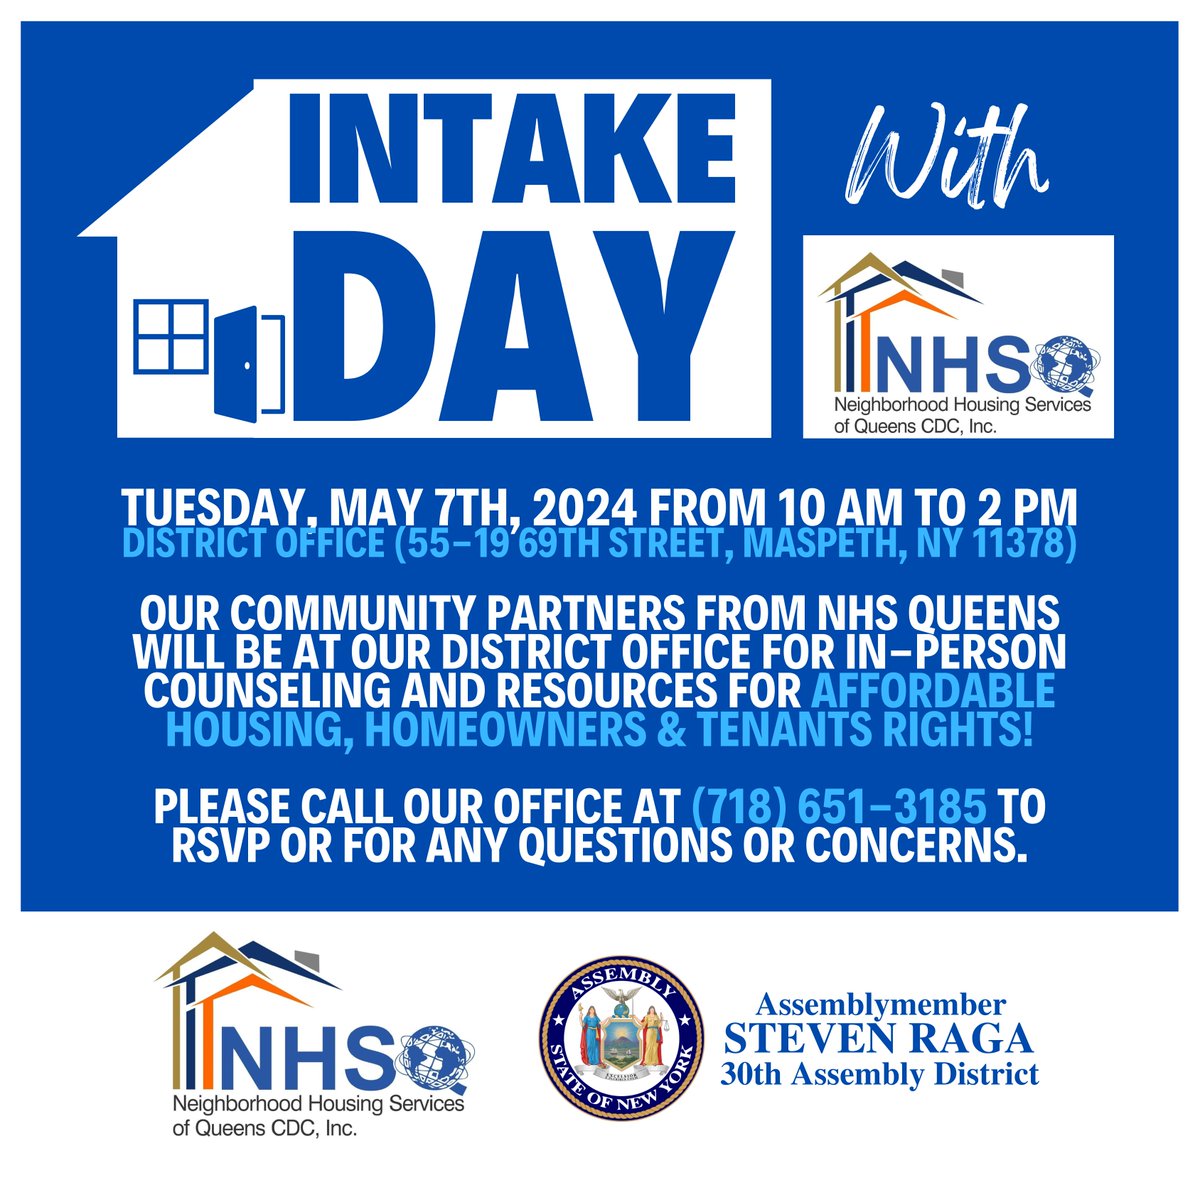 Next week, our office is teaming up with @NHSofQueens to host an Intake Day in Assembly District 30! They'll be offering in-person counseling and resources on affordable housing, homeownership, and tenants rights! Please note that RSVP is required for attendance.